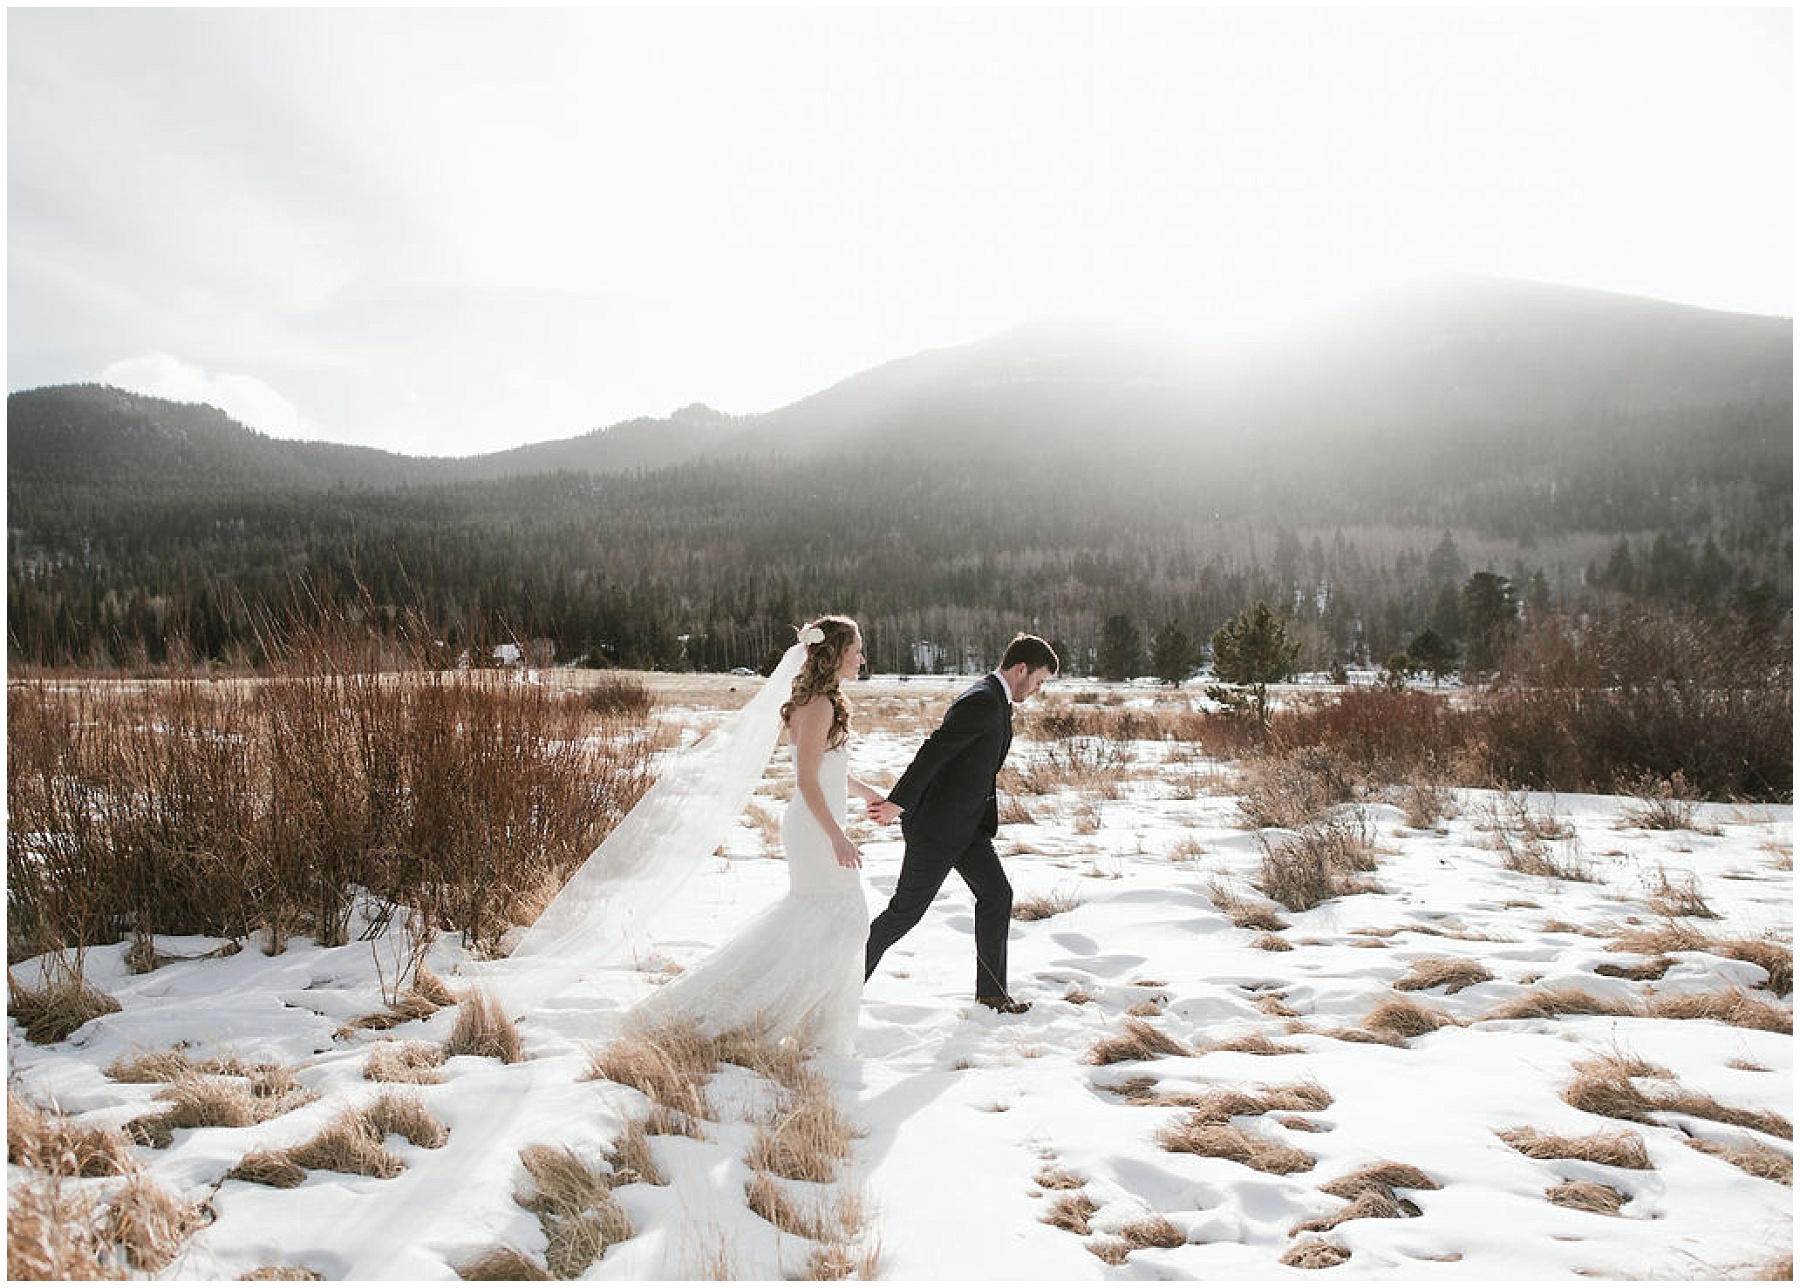 Katesalleyphotography-189_Haley and Dan get married in Estes Park.jpg